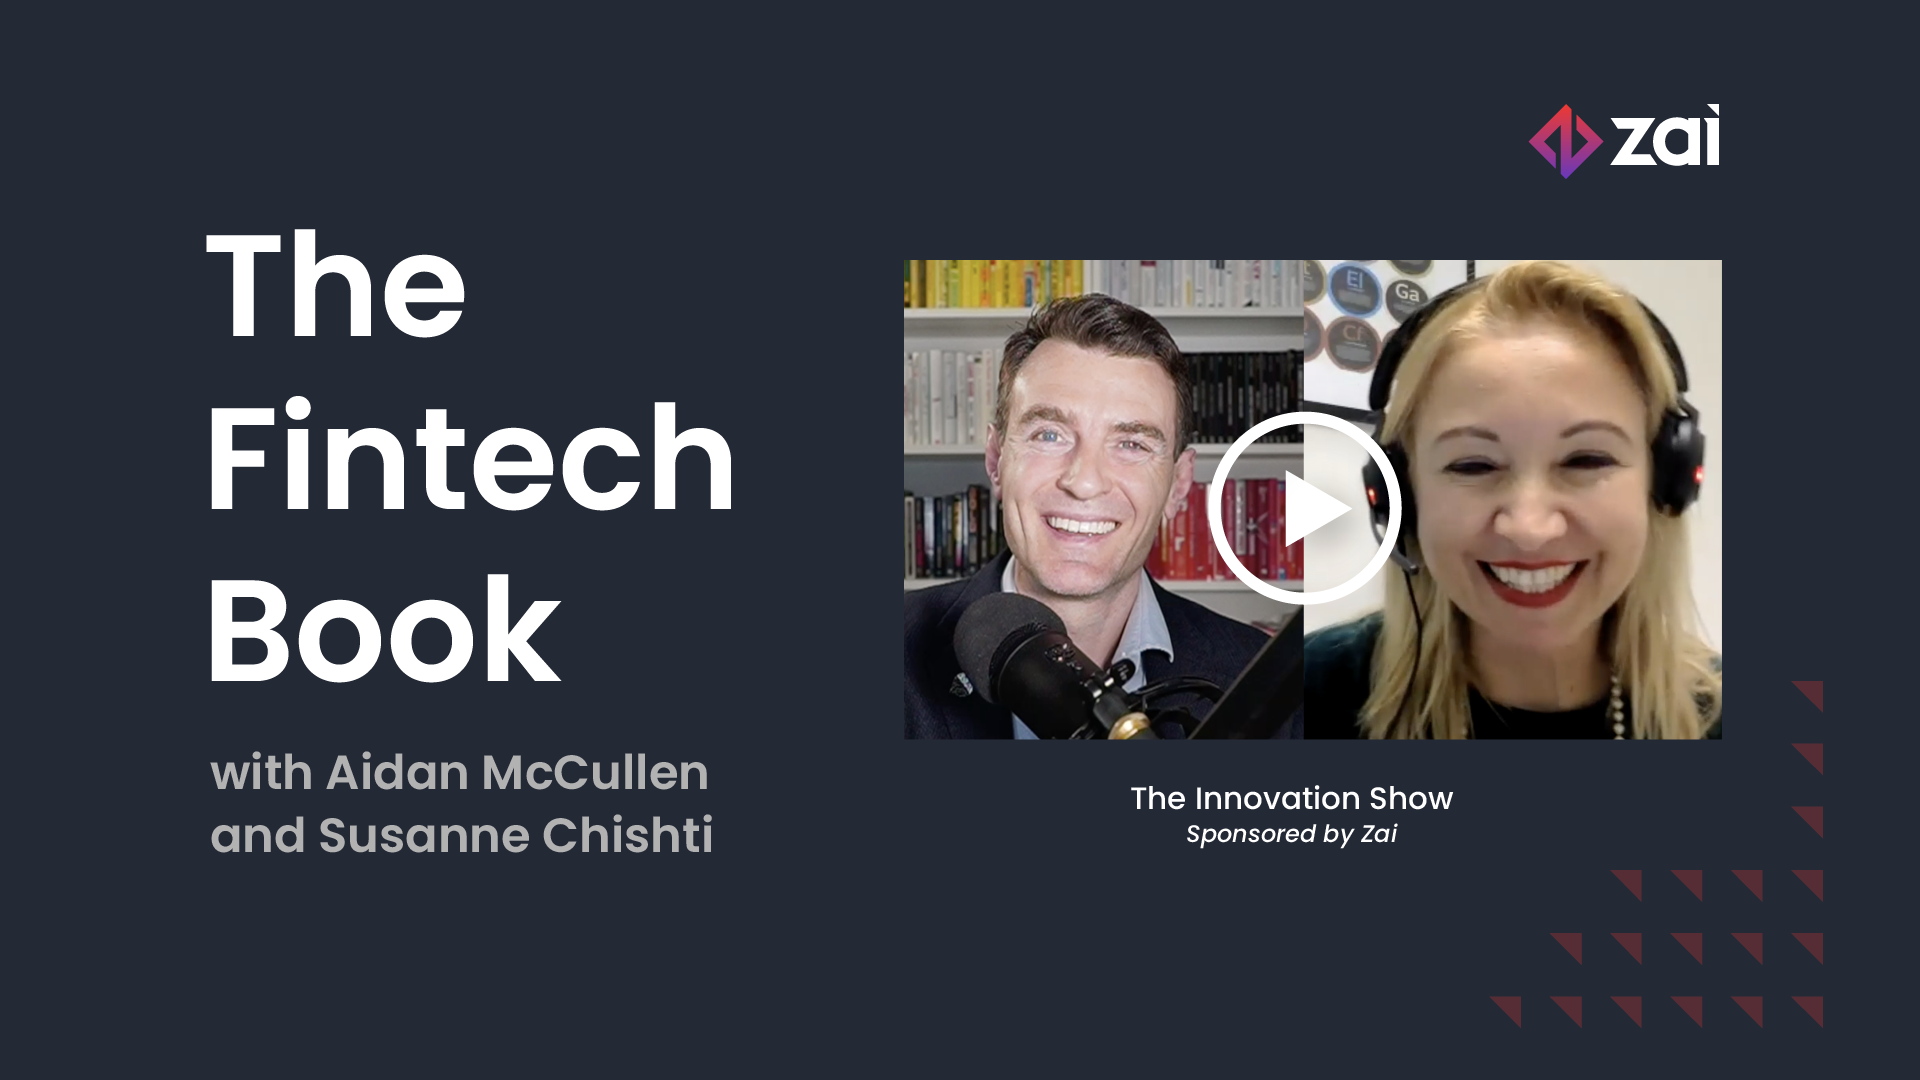 The Susanne Chishti podcast with Aidan McCullen of The Innovation Show